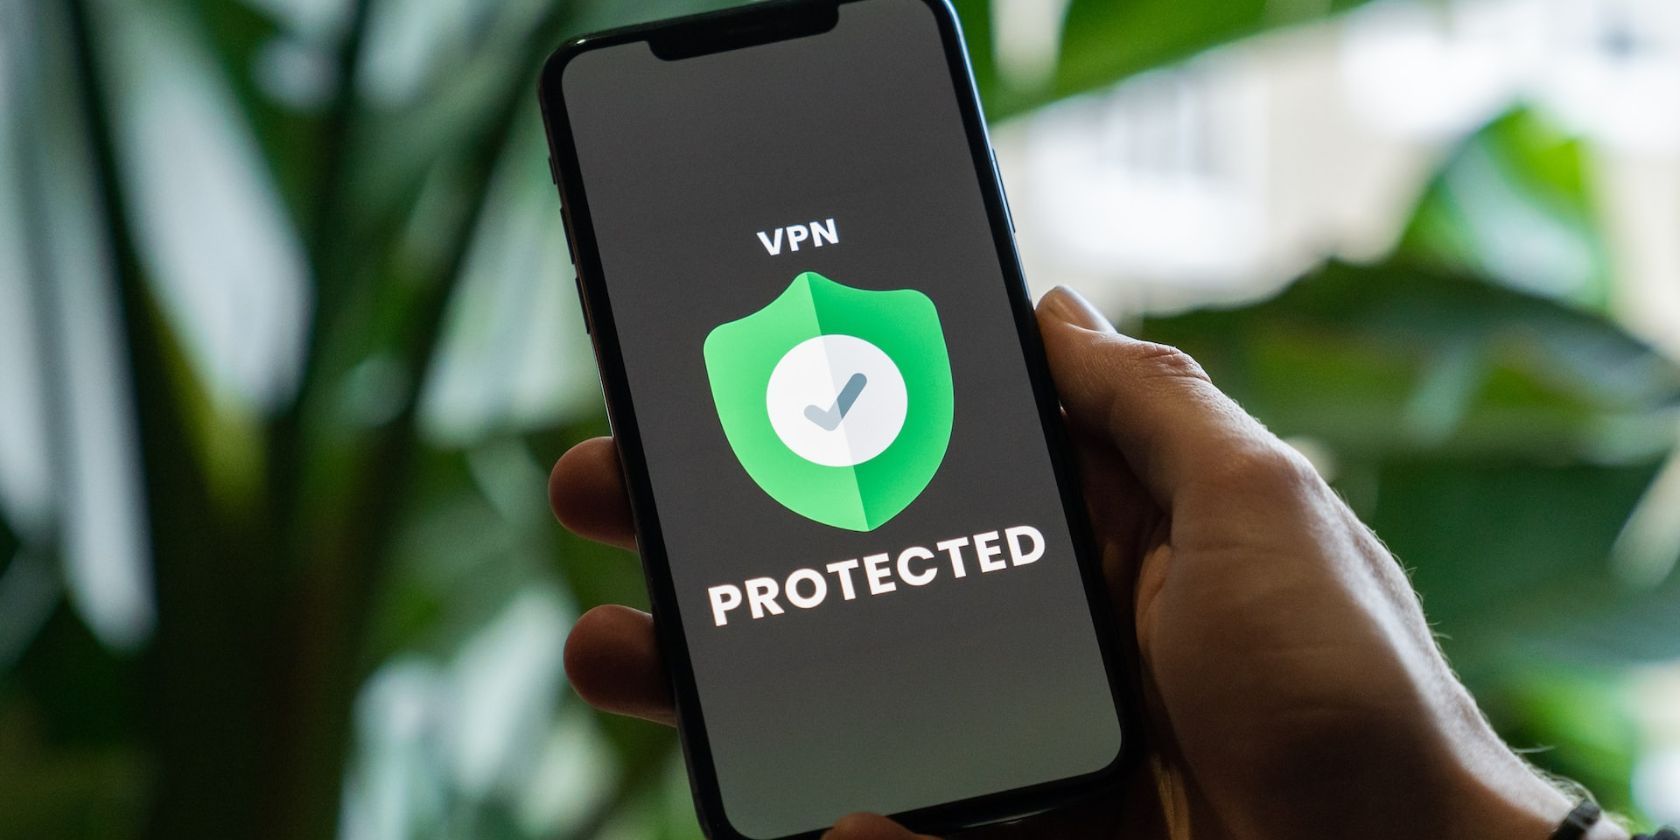 Phone is VPN protected